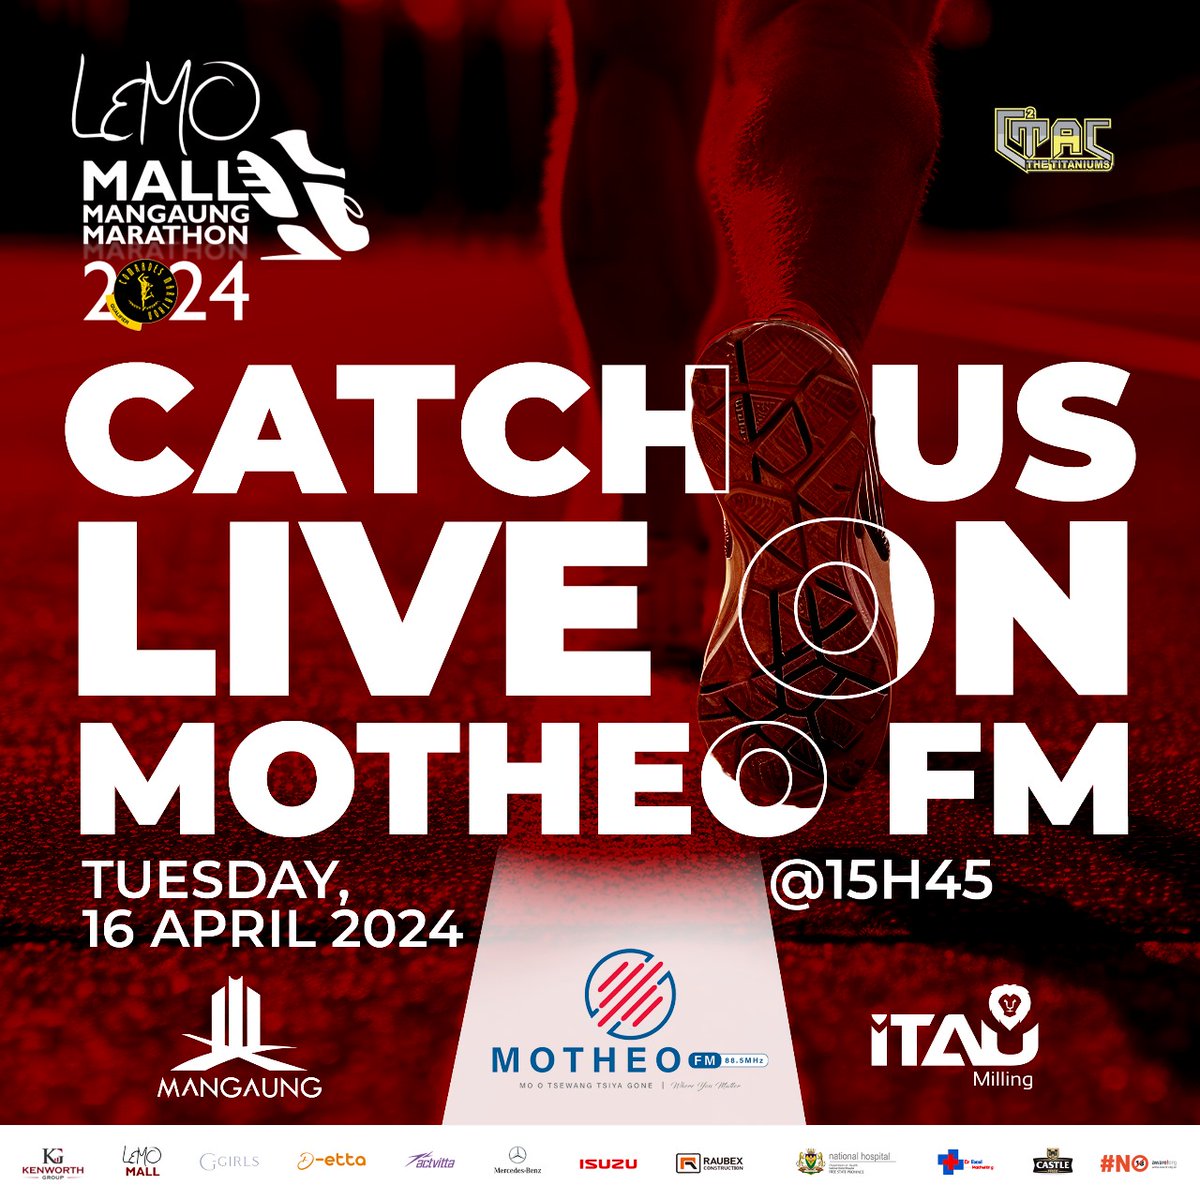 Today catch our live interview on Motheo FM, 16 April 2024 at 15:45 where we will be talking about the Lemo Mall Mangaung Marathon and the different routes. MOTHEO FM 88.5, MO TSEWANG TSIYA GONE | WHERE YOU MATTER #Tshepe #CCTAC #C2TAC